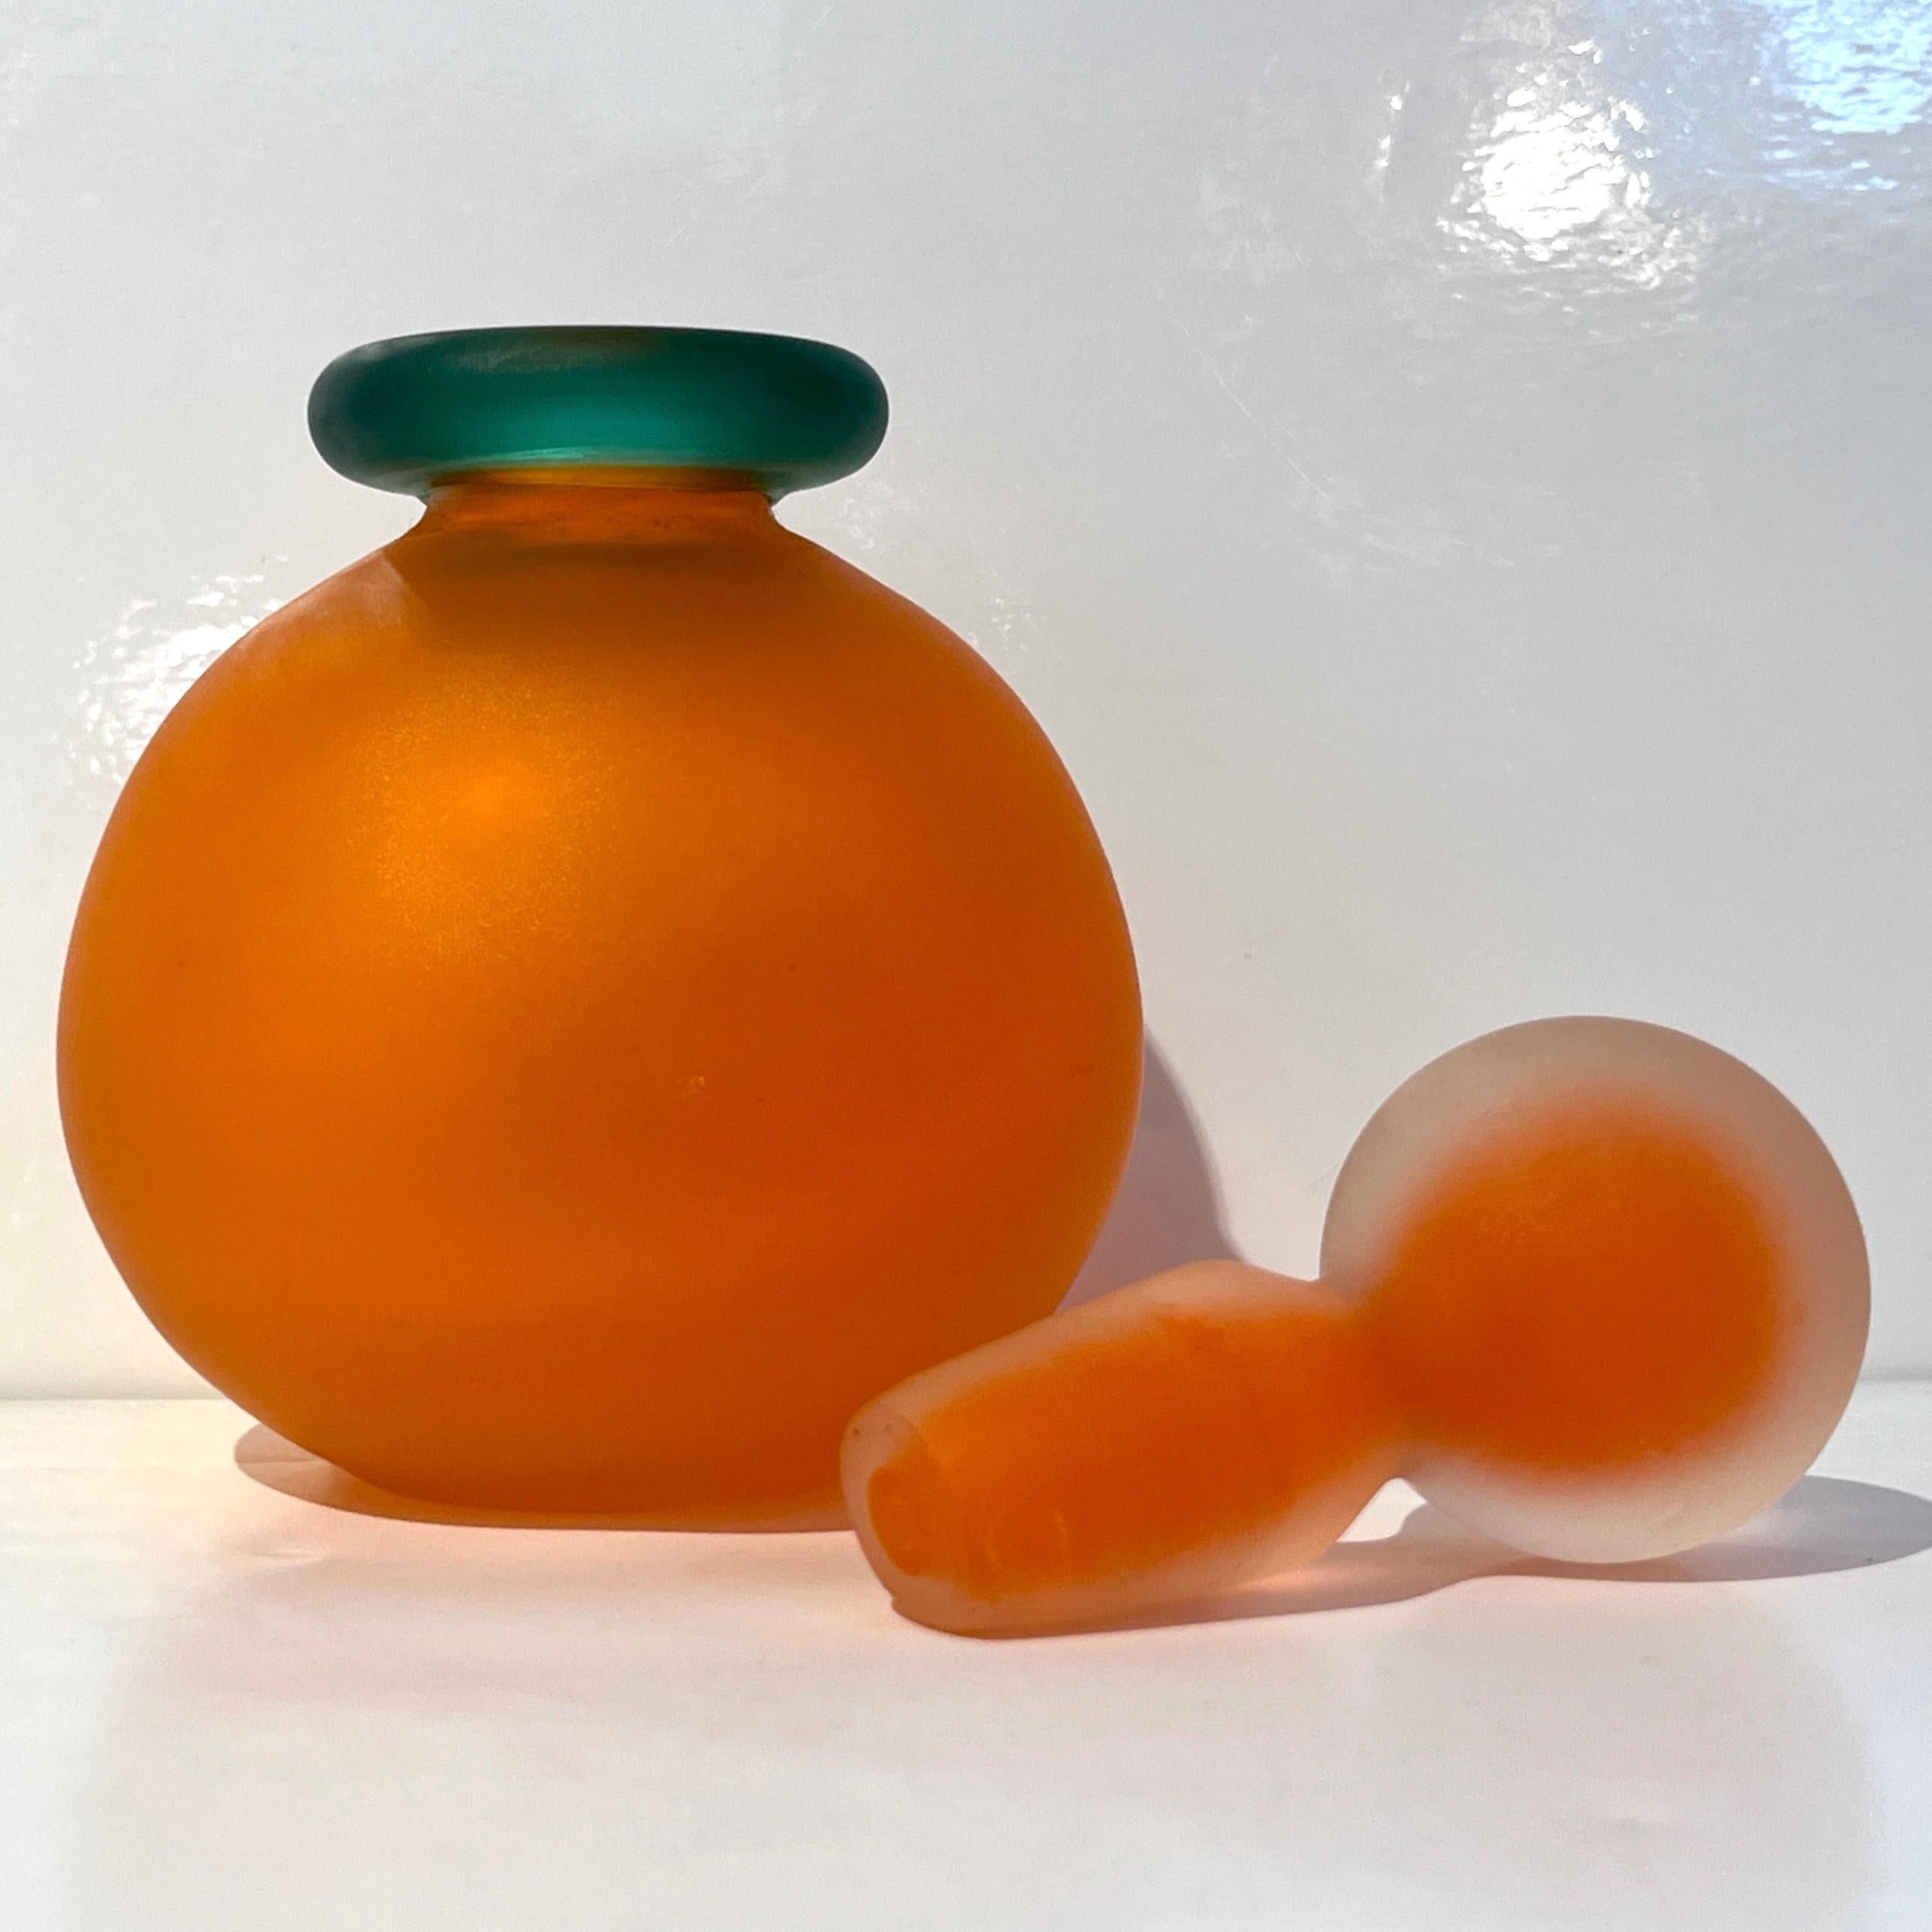 An early 1980s Venitian bottle in Frosted Murano glass in a vibrant orange and emerald green with an elegant sophisticated stopper worked with the frosted and Sommerso technique adds an intriguing side to this decorative object, typical of the work